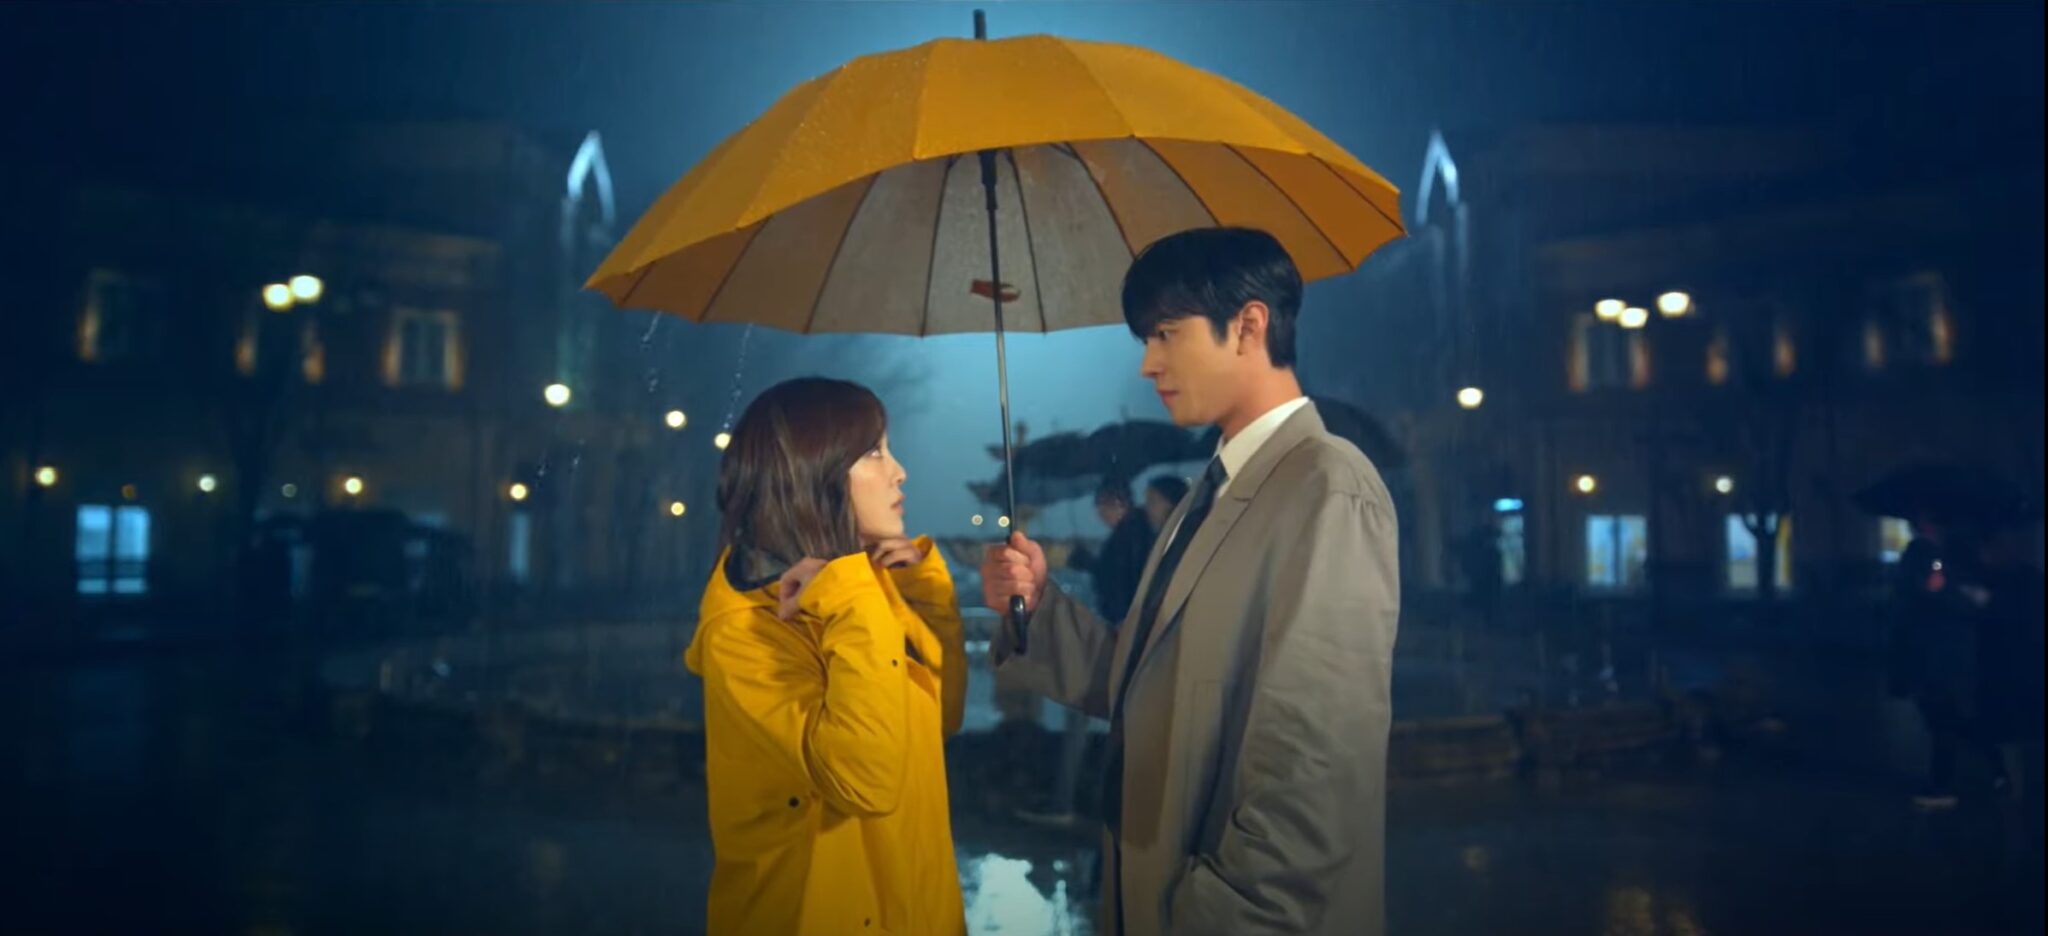 Ahn Hyo-seop has A Business Proposal for Kim Se-jung in new teaser